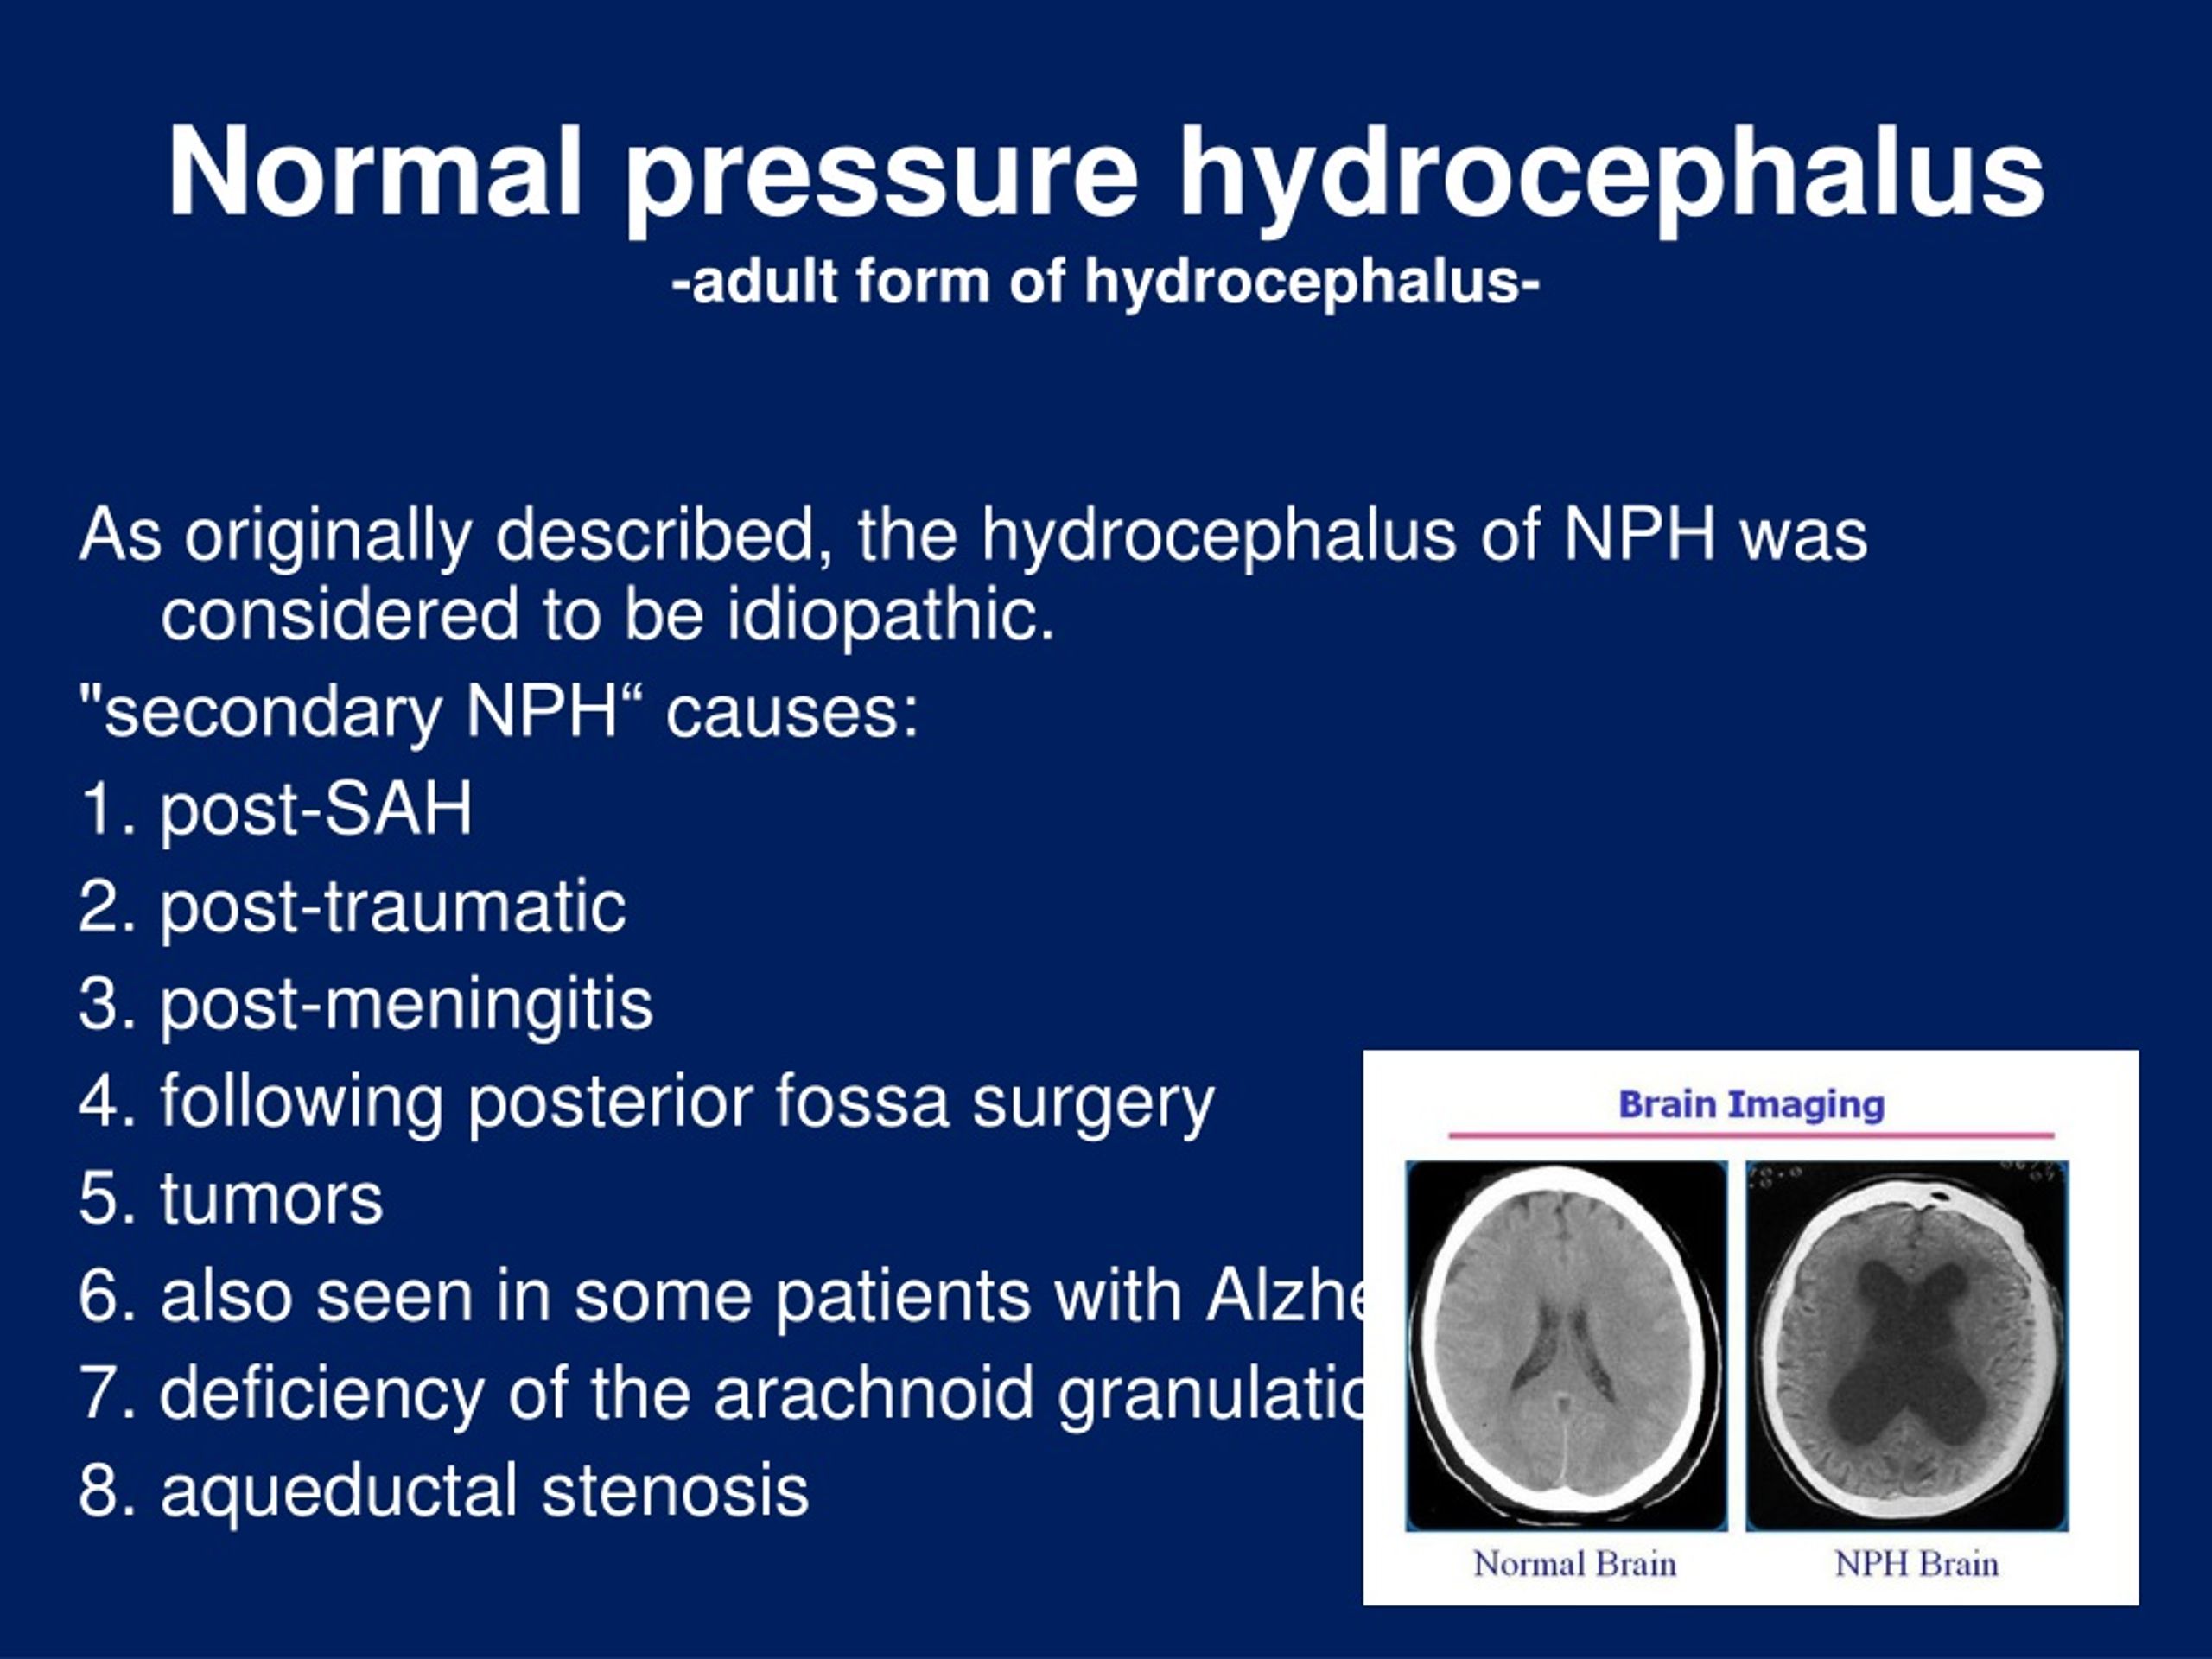 Ppt Hydrocephalus Ventriculo Peritoneal Shunt Powerpoint Presentation Id9224266 0047